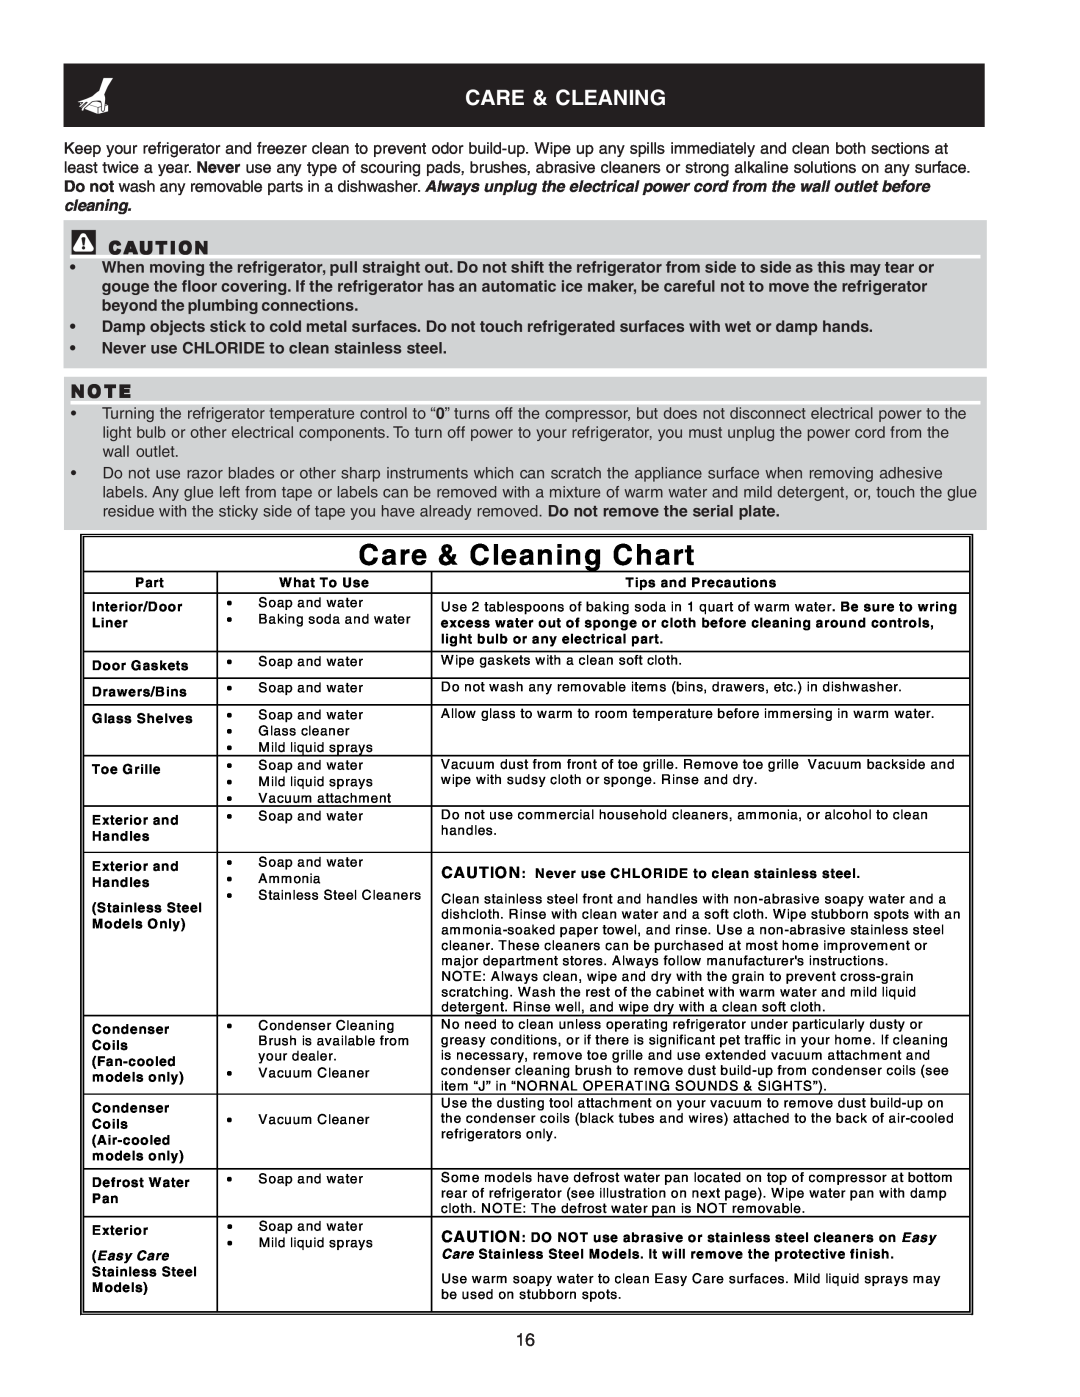 Crosley 241824301 warranty Care & Cleaning Chart, Never use CHLORIDE to clean stainless steel 